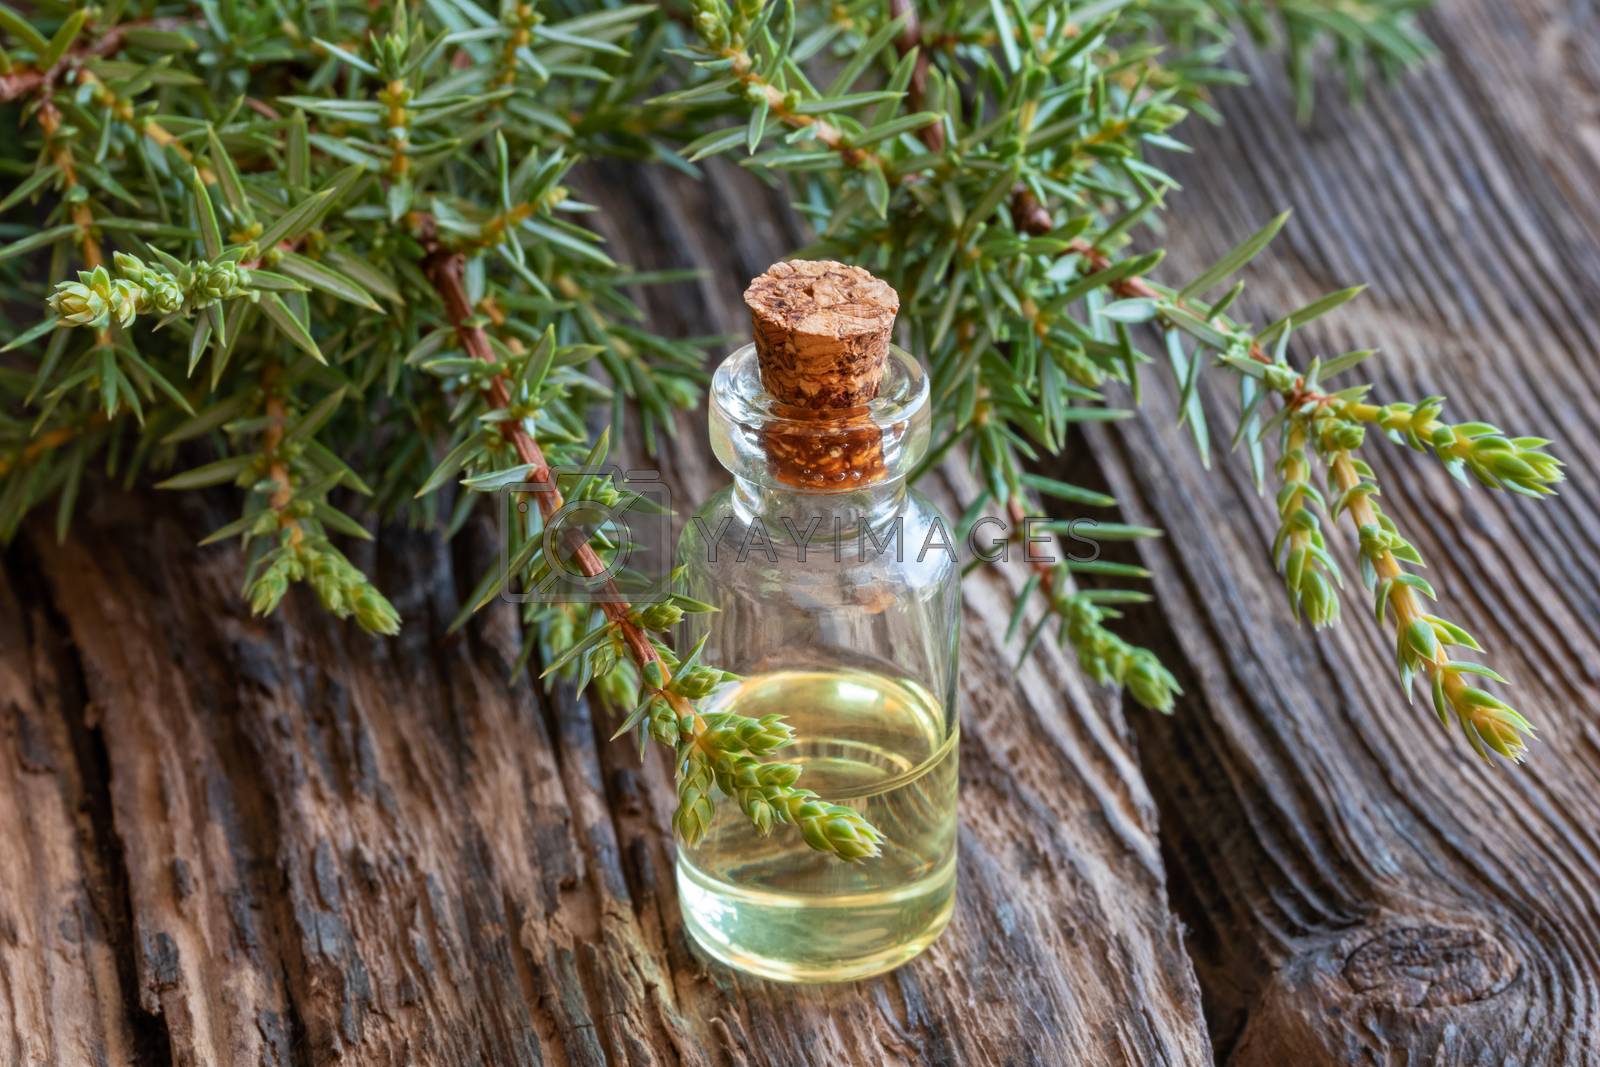 Royalty free image of A bottle of juniper essential oil with fresh juniper twigs by madeleine_steinbach